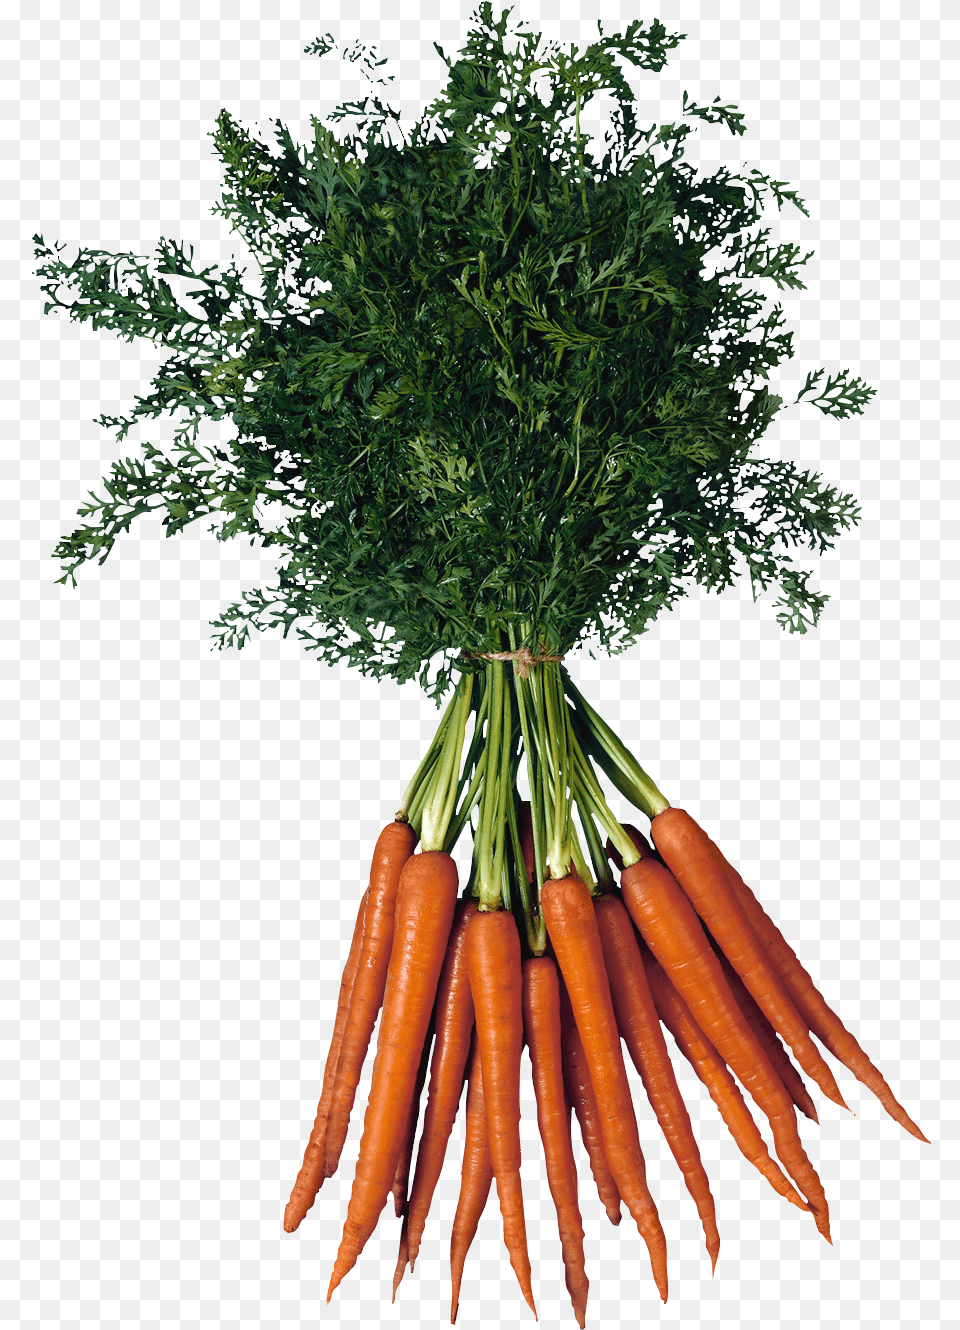 Carrot Transparent Image Bunch Of Carrots Transparent, Food, Plant, Produce, Vegetable Free Png